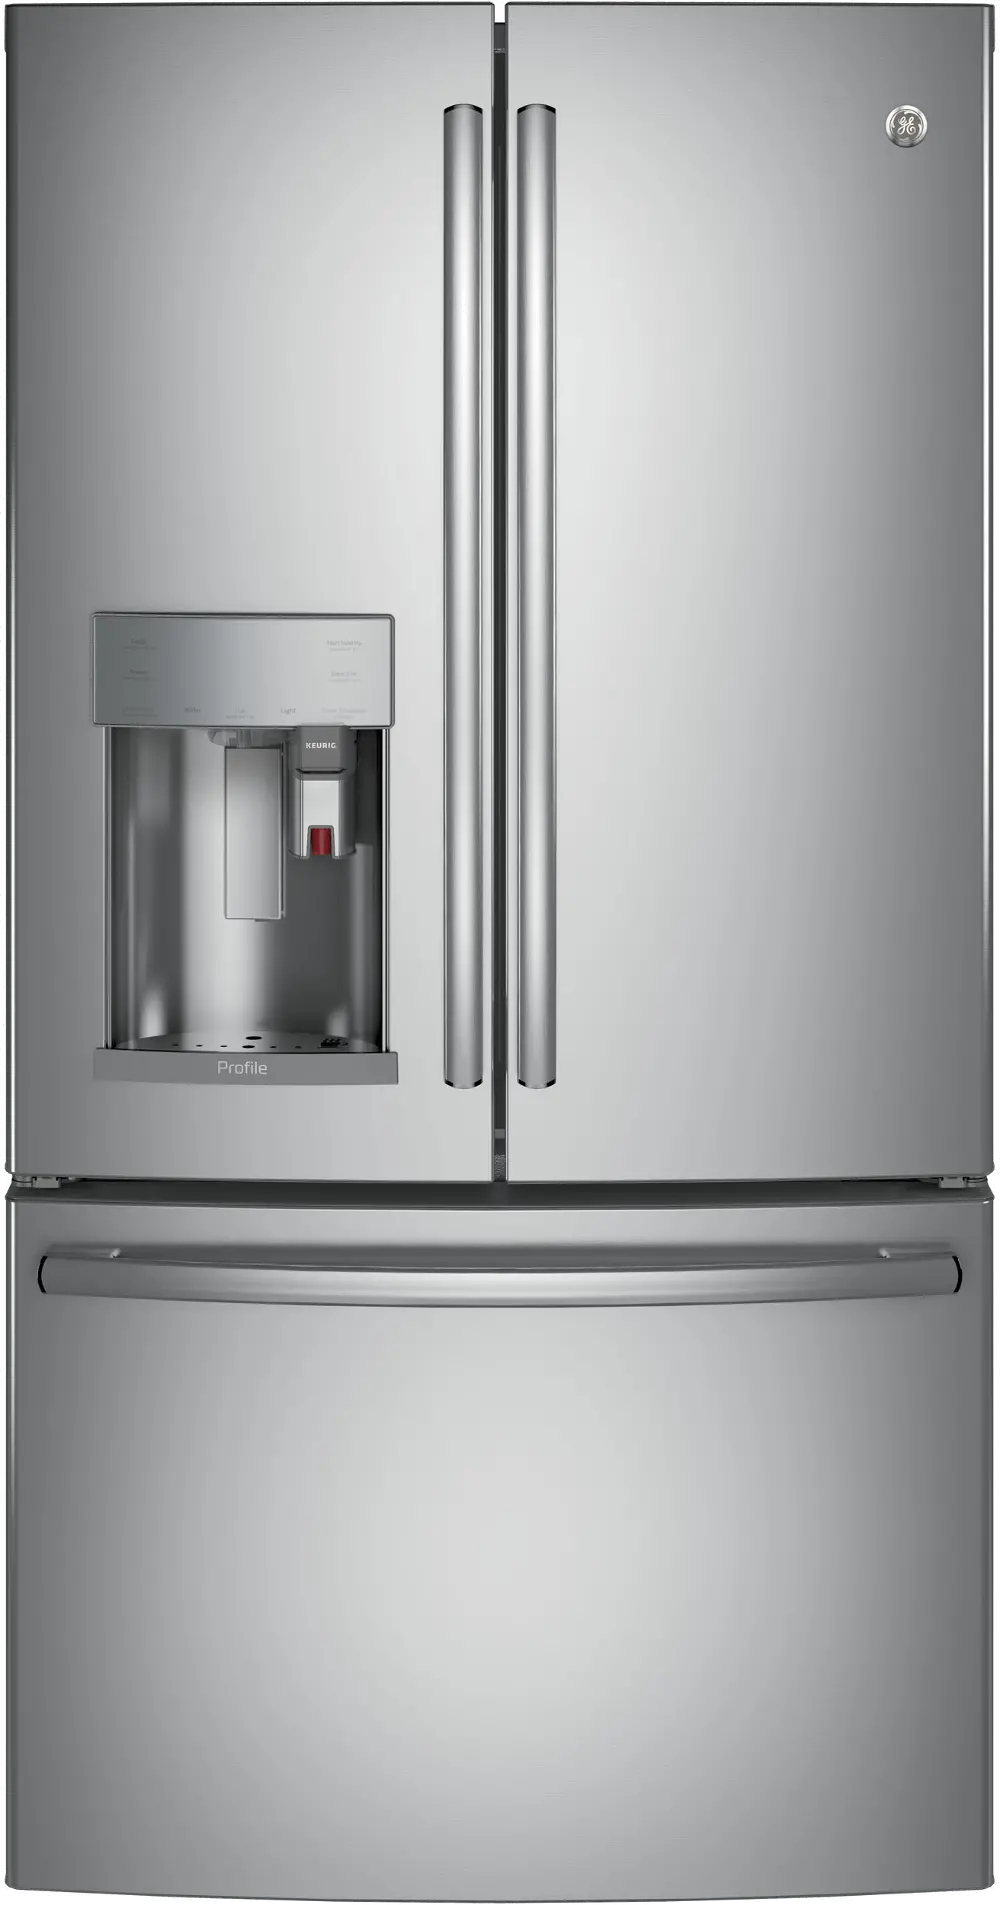 PYE22PBLTS GE Profile Series ENERGY STAR Stainless Steel Counter-Depth French-Door Refrigerator - 36 Inch with Keurig K-Cup Brewing System-1